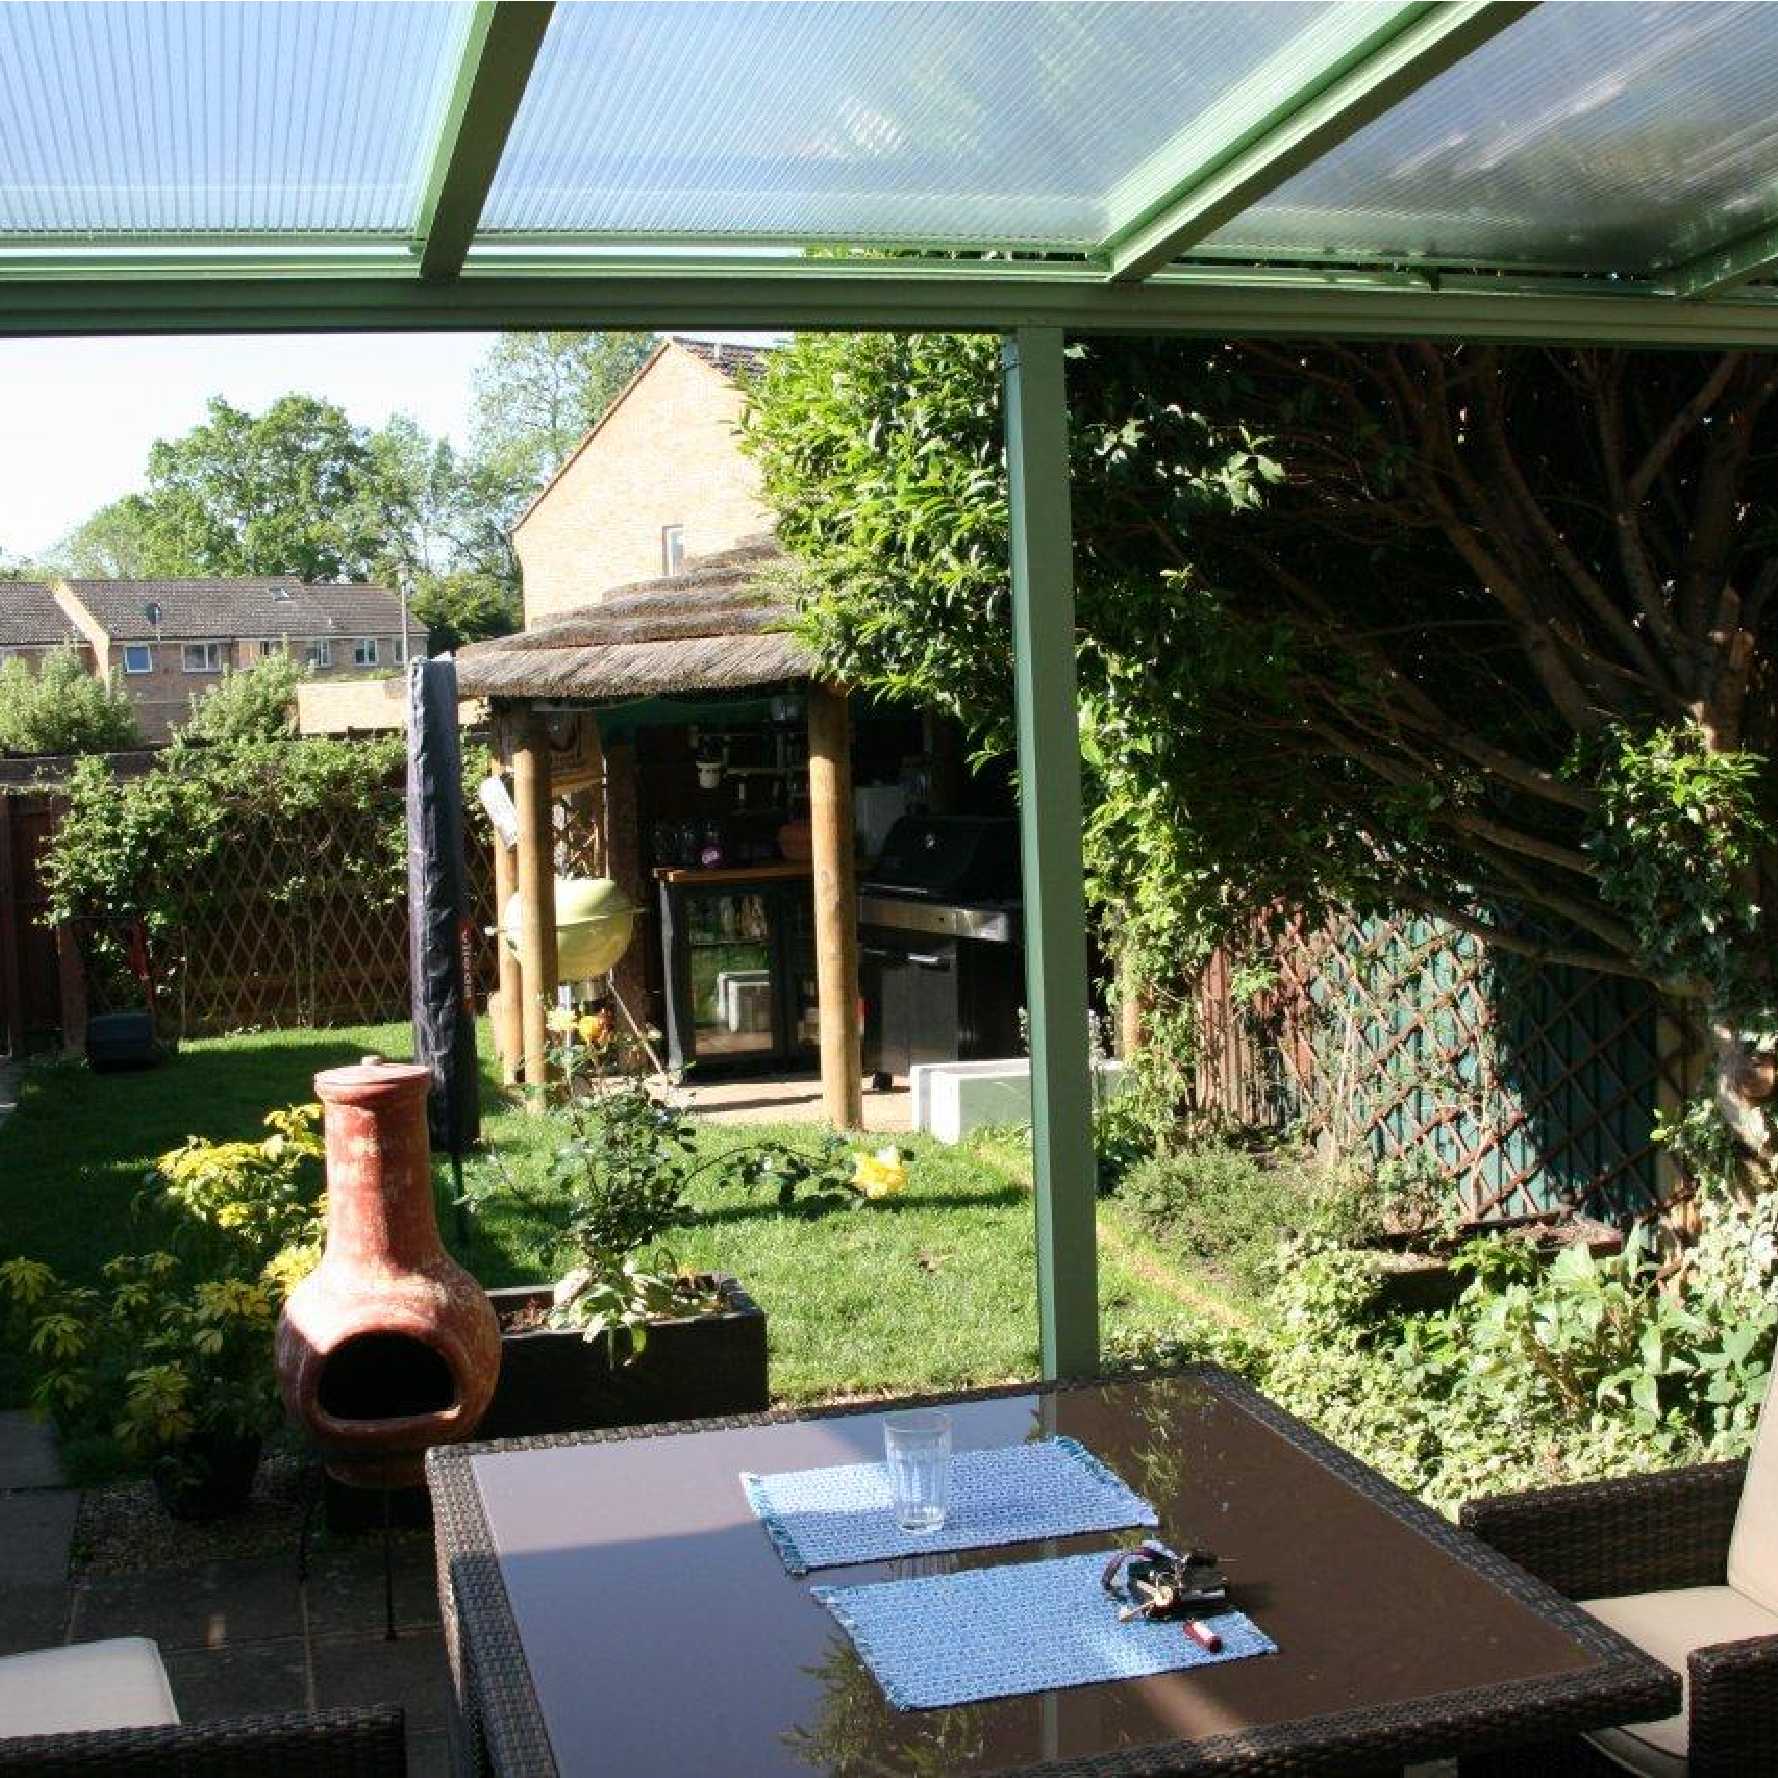 Affordable Omega Smart Lean-To Canopy, White with 16mm Polycarbonate Glazing - 8.4m (W) x 1.5m (P), (4) Supporting Posts